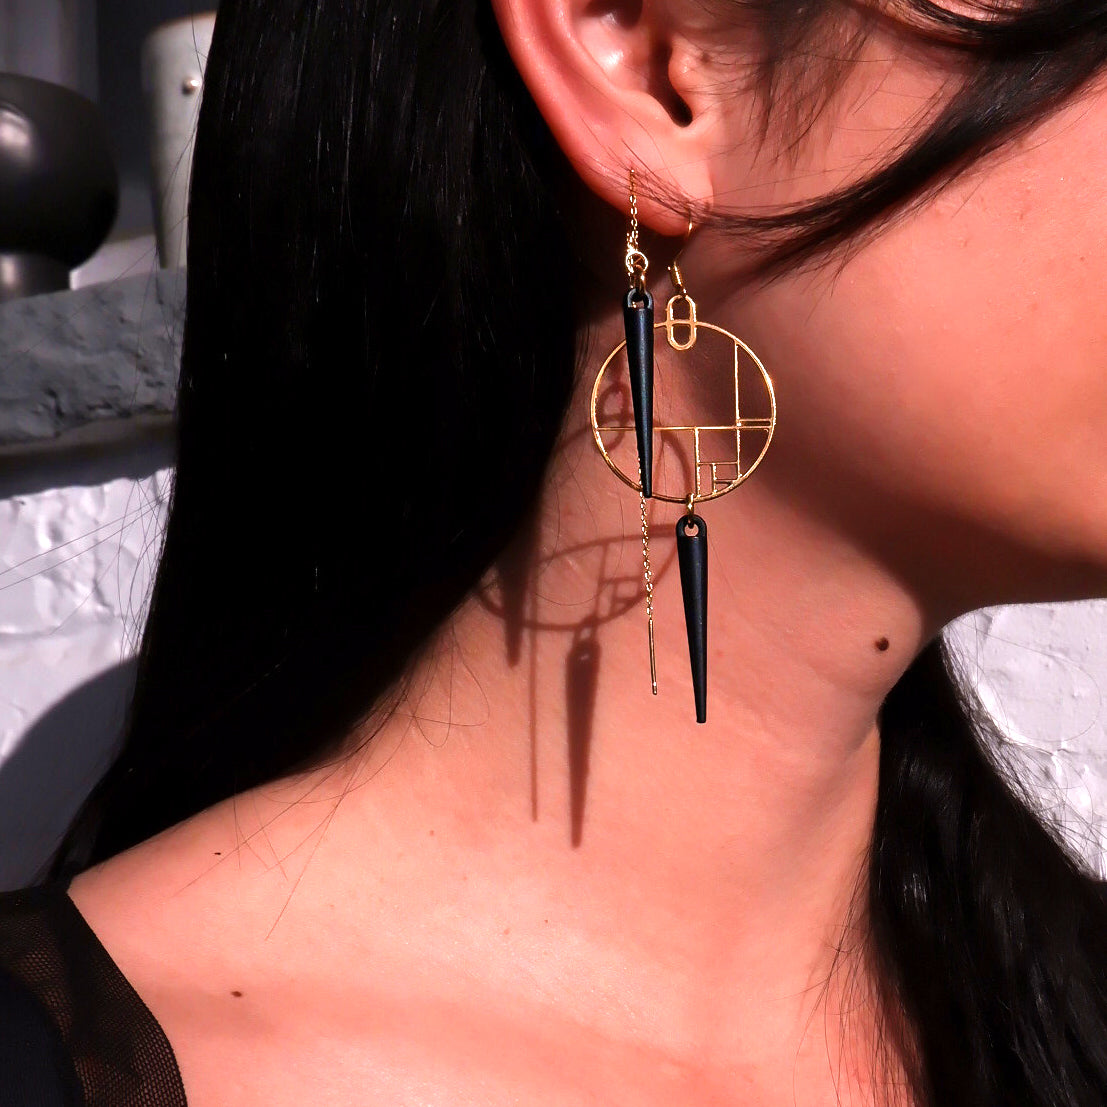 modern art style earrings with spikes